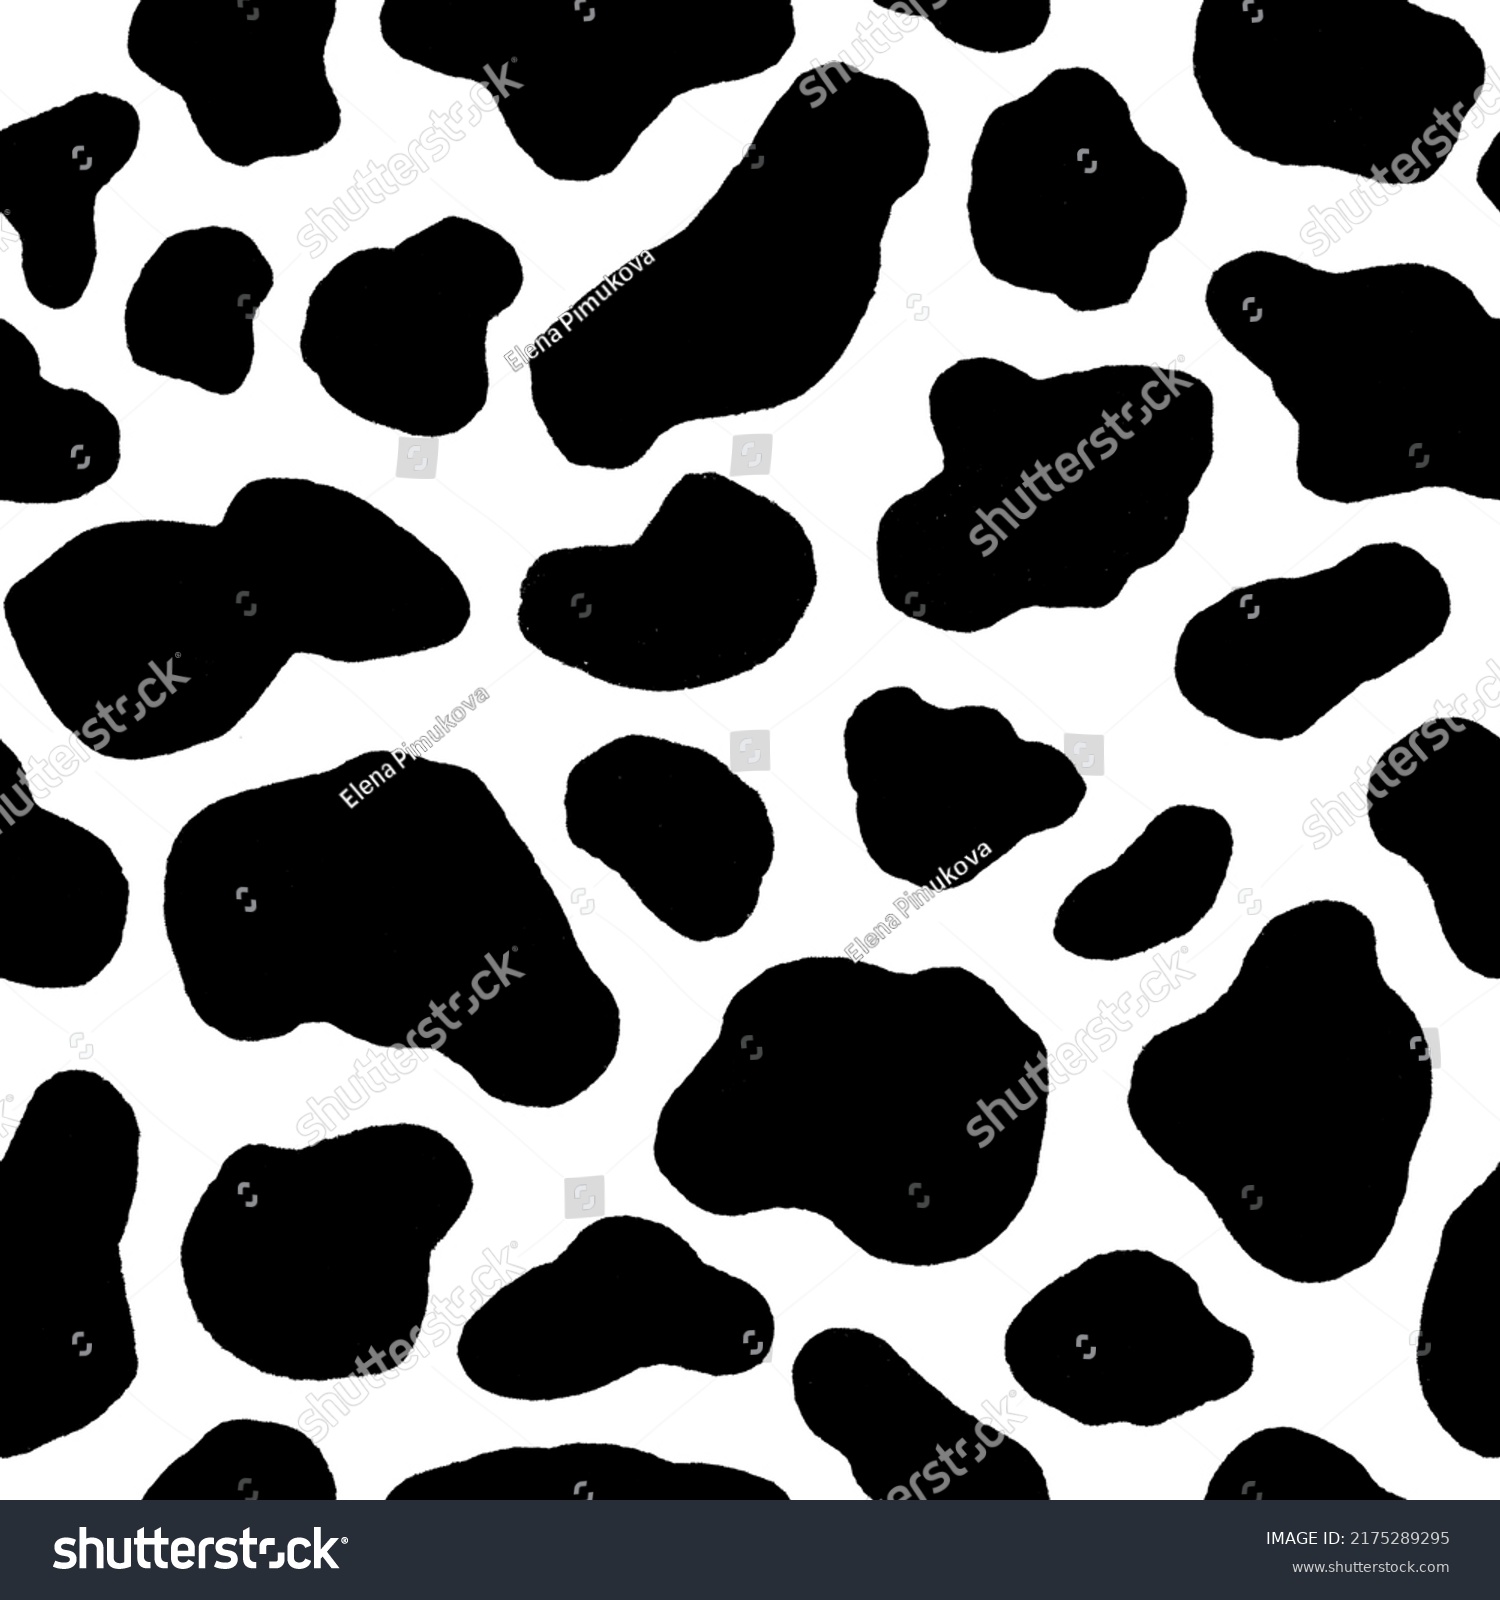 SVG of Cow hide seamless pattern. Holstein cattle texture. Cow skin pattern with smooth black and white texture. Dalmatian dog stains print. Black spots background. Animal skin template. Vector illustration. svg